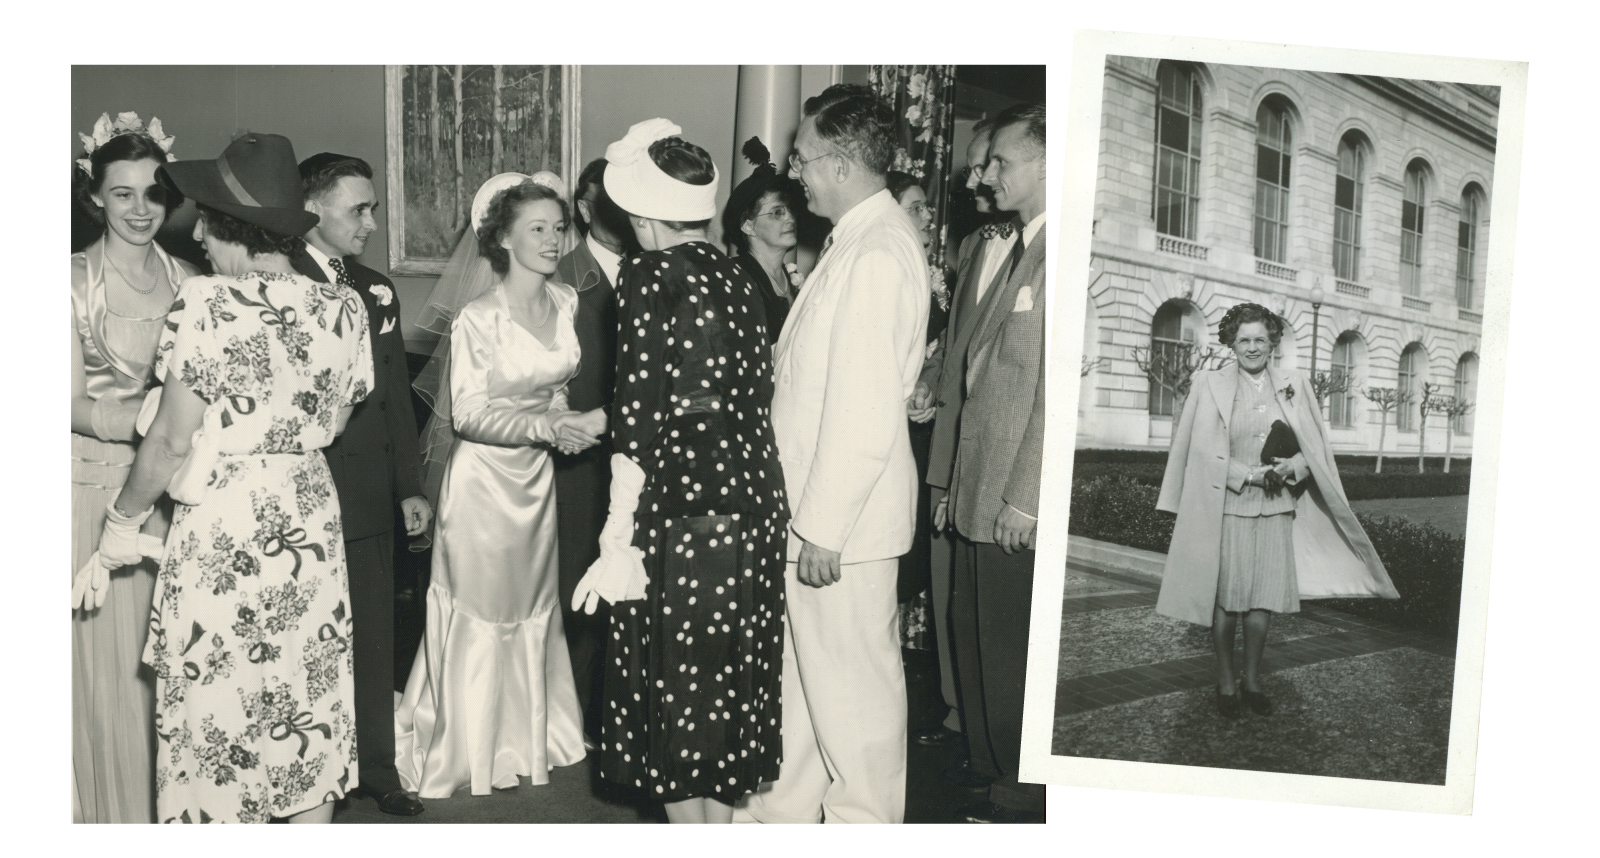 A Beautiful Life: Anne Rolt-Wheeler Skidmore married Merle Skidmore on July 25, 1949. Her sister Pat (pictured left) was a bridesmaid, and Denison President Kenneth Brown and his wife (greeting the bride) were guests. Ruth Hobart Rolt-Wheel…